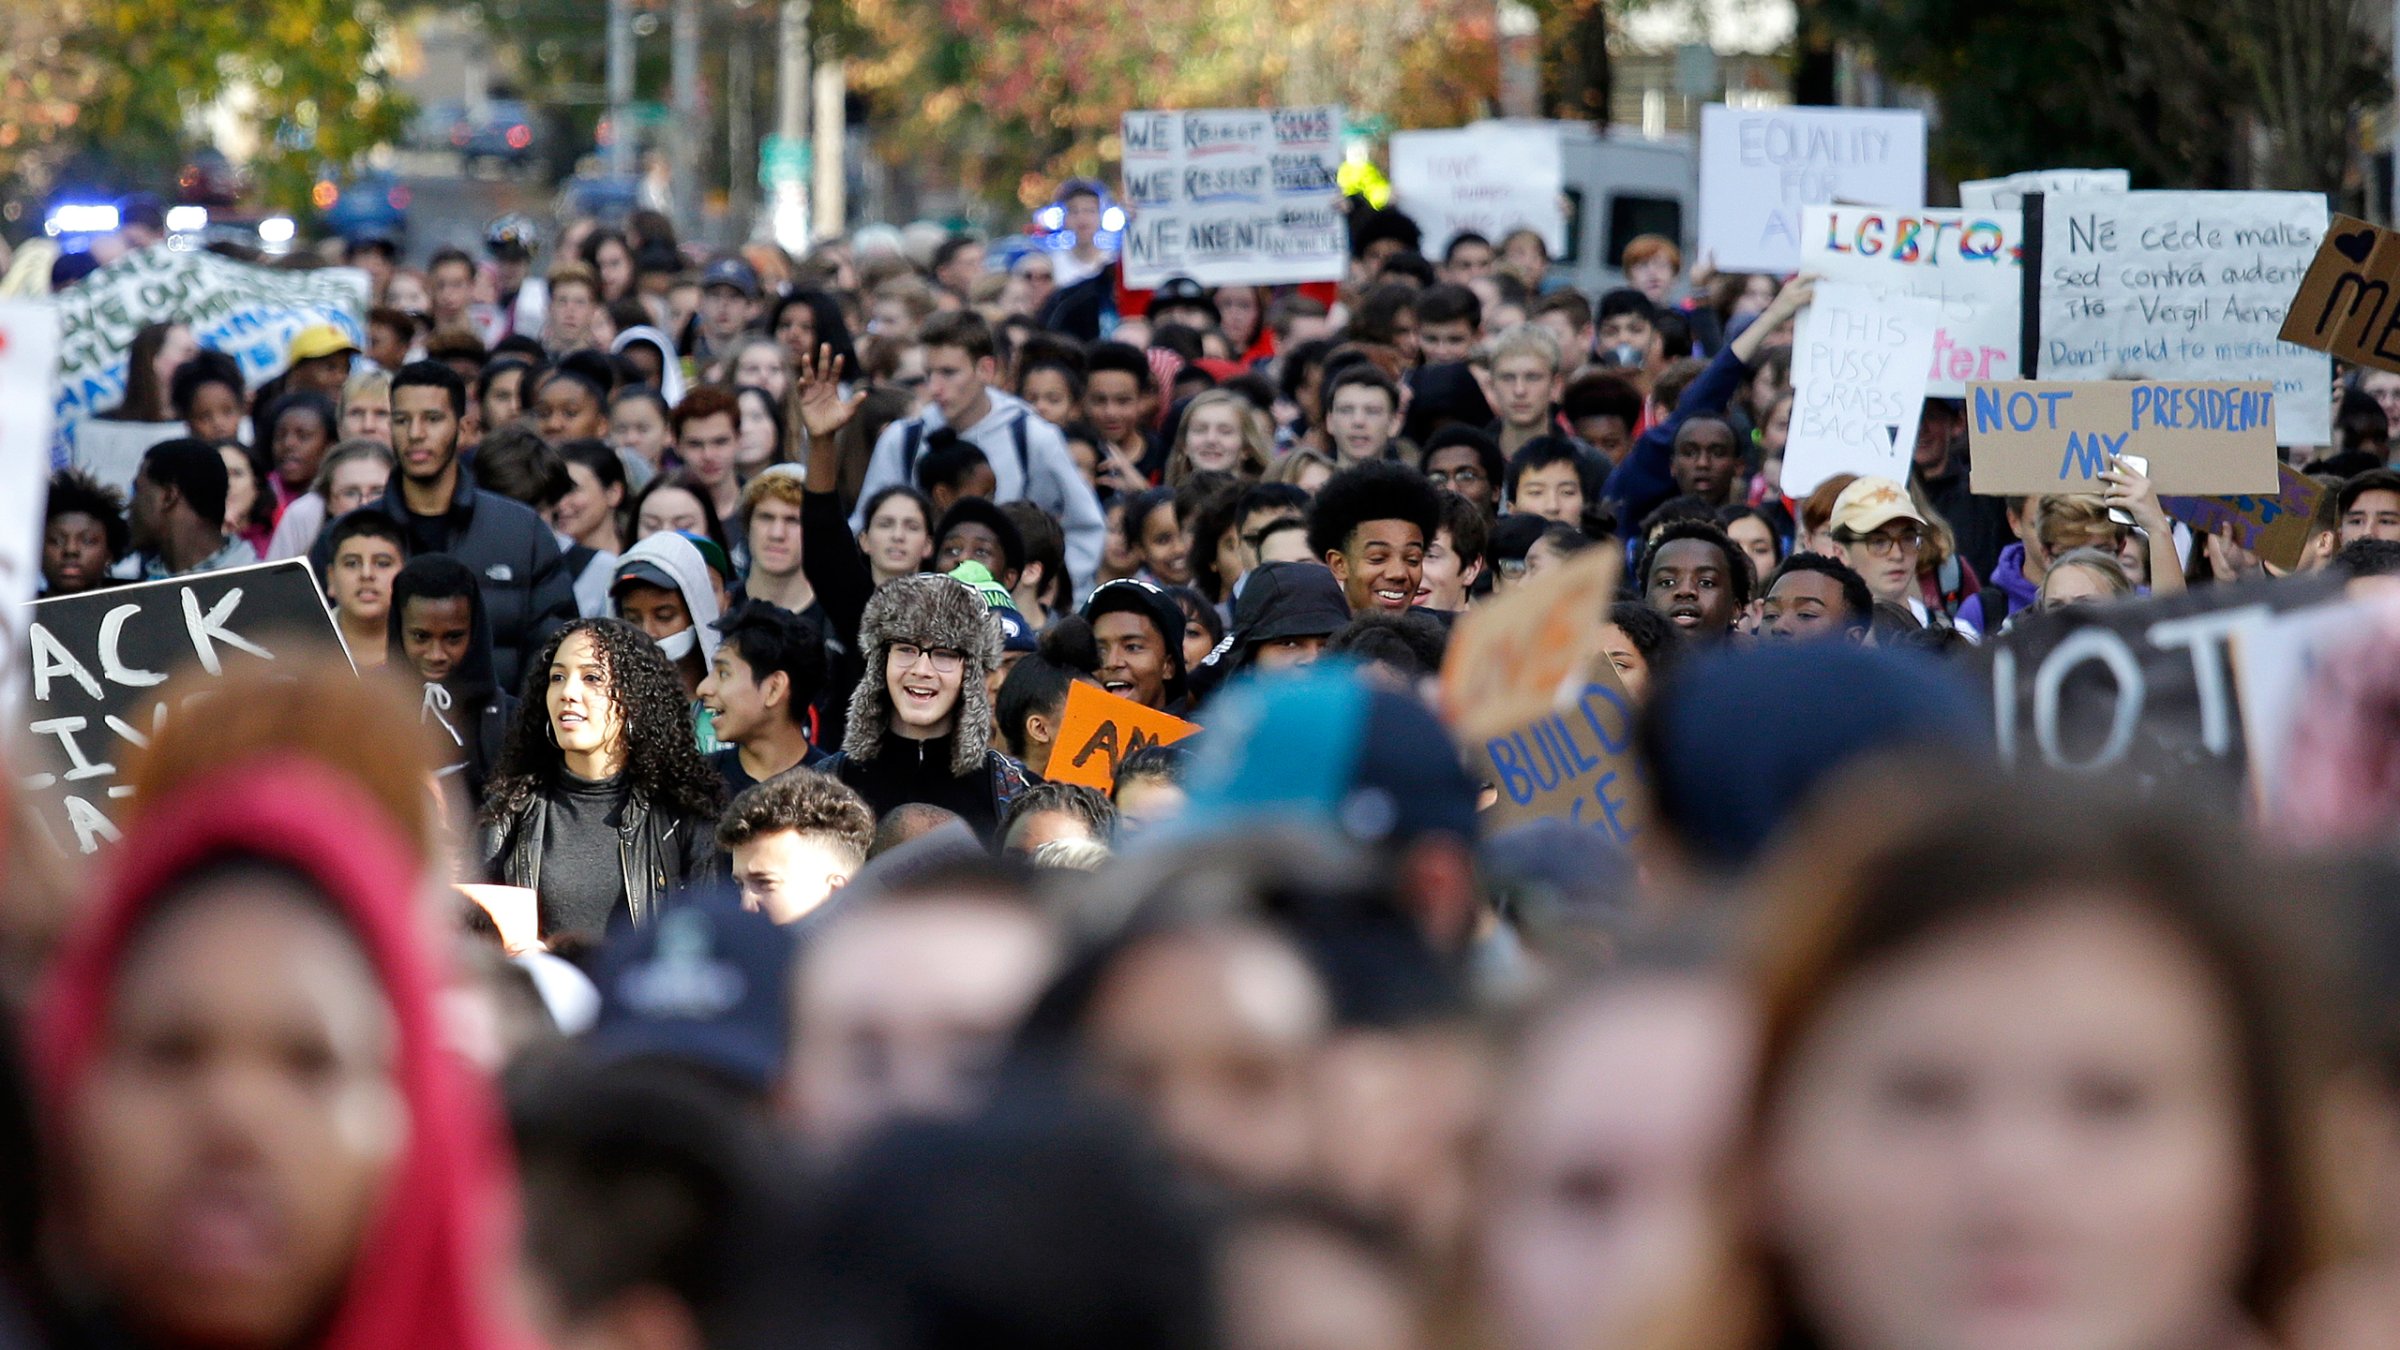 High school students fill a street as they head to join others during a walkout to protest the election of Donald Trump as president, Monday, Nov. 14, 2016, in Seattle. A spokesman with Seattle Public Schools estimates that about 2,300 students from 14 middle and high schools participated in the walkout and said that students who walk out of class will get an "unexcused absence." (AP Photo/Elaine Thompson)